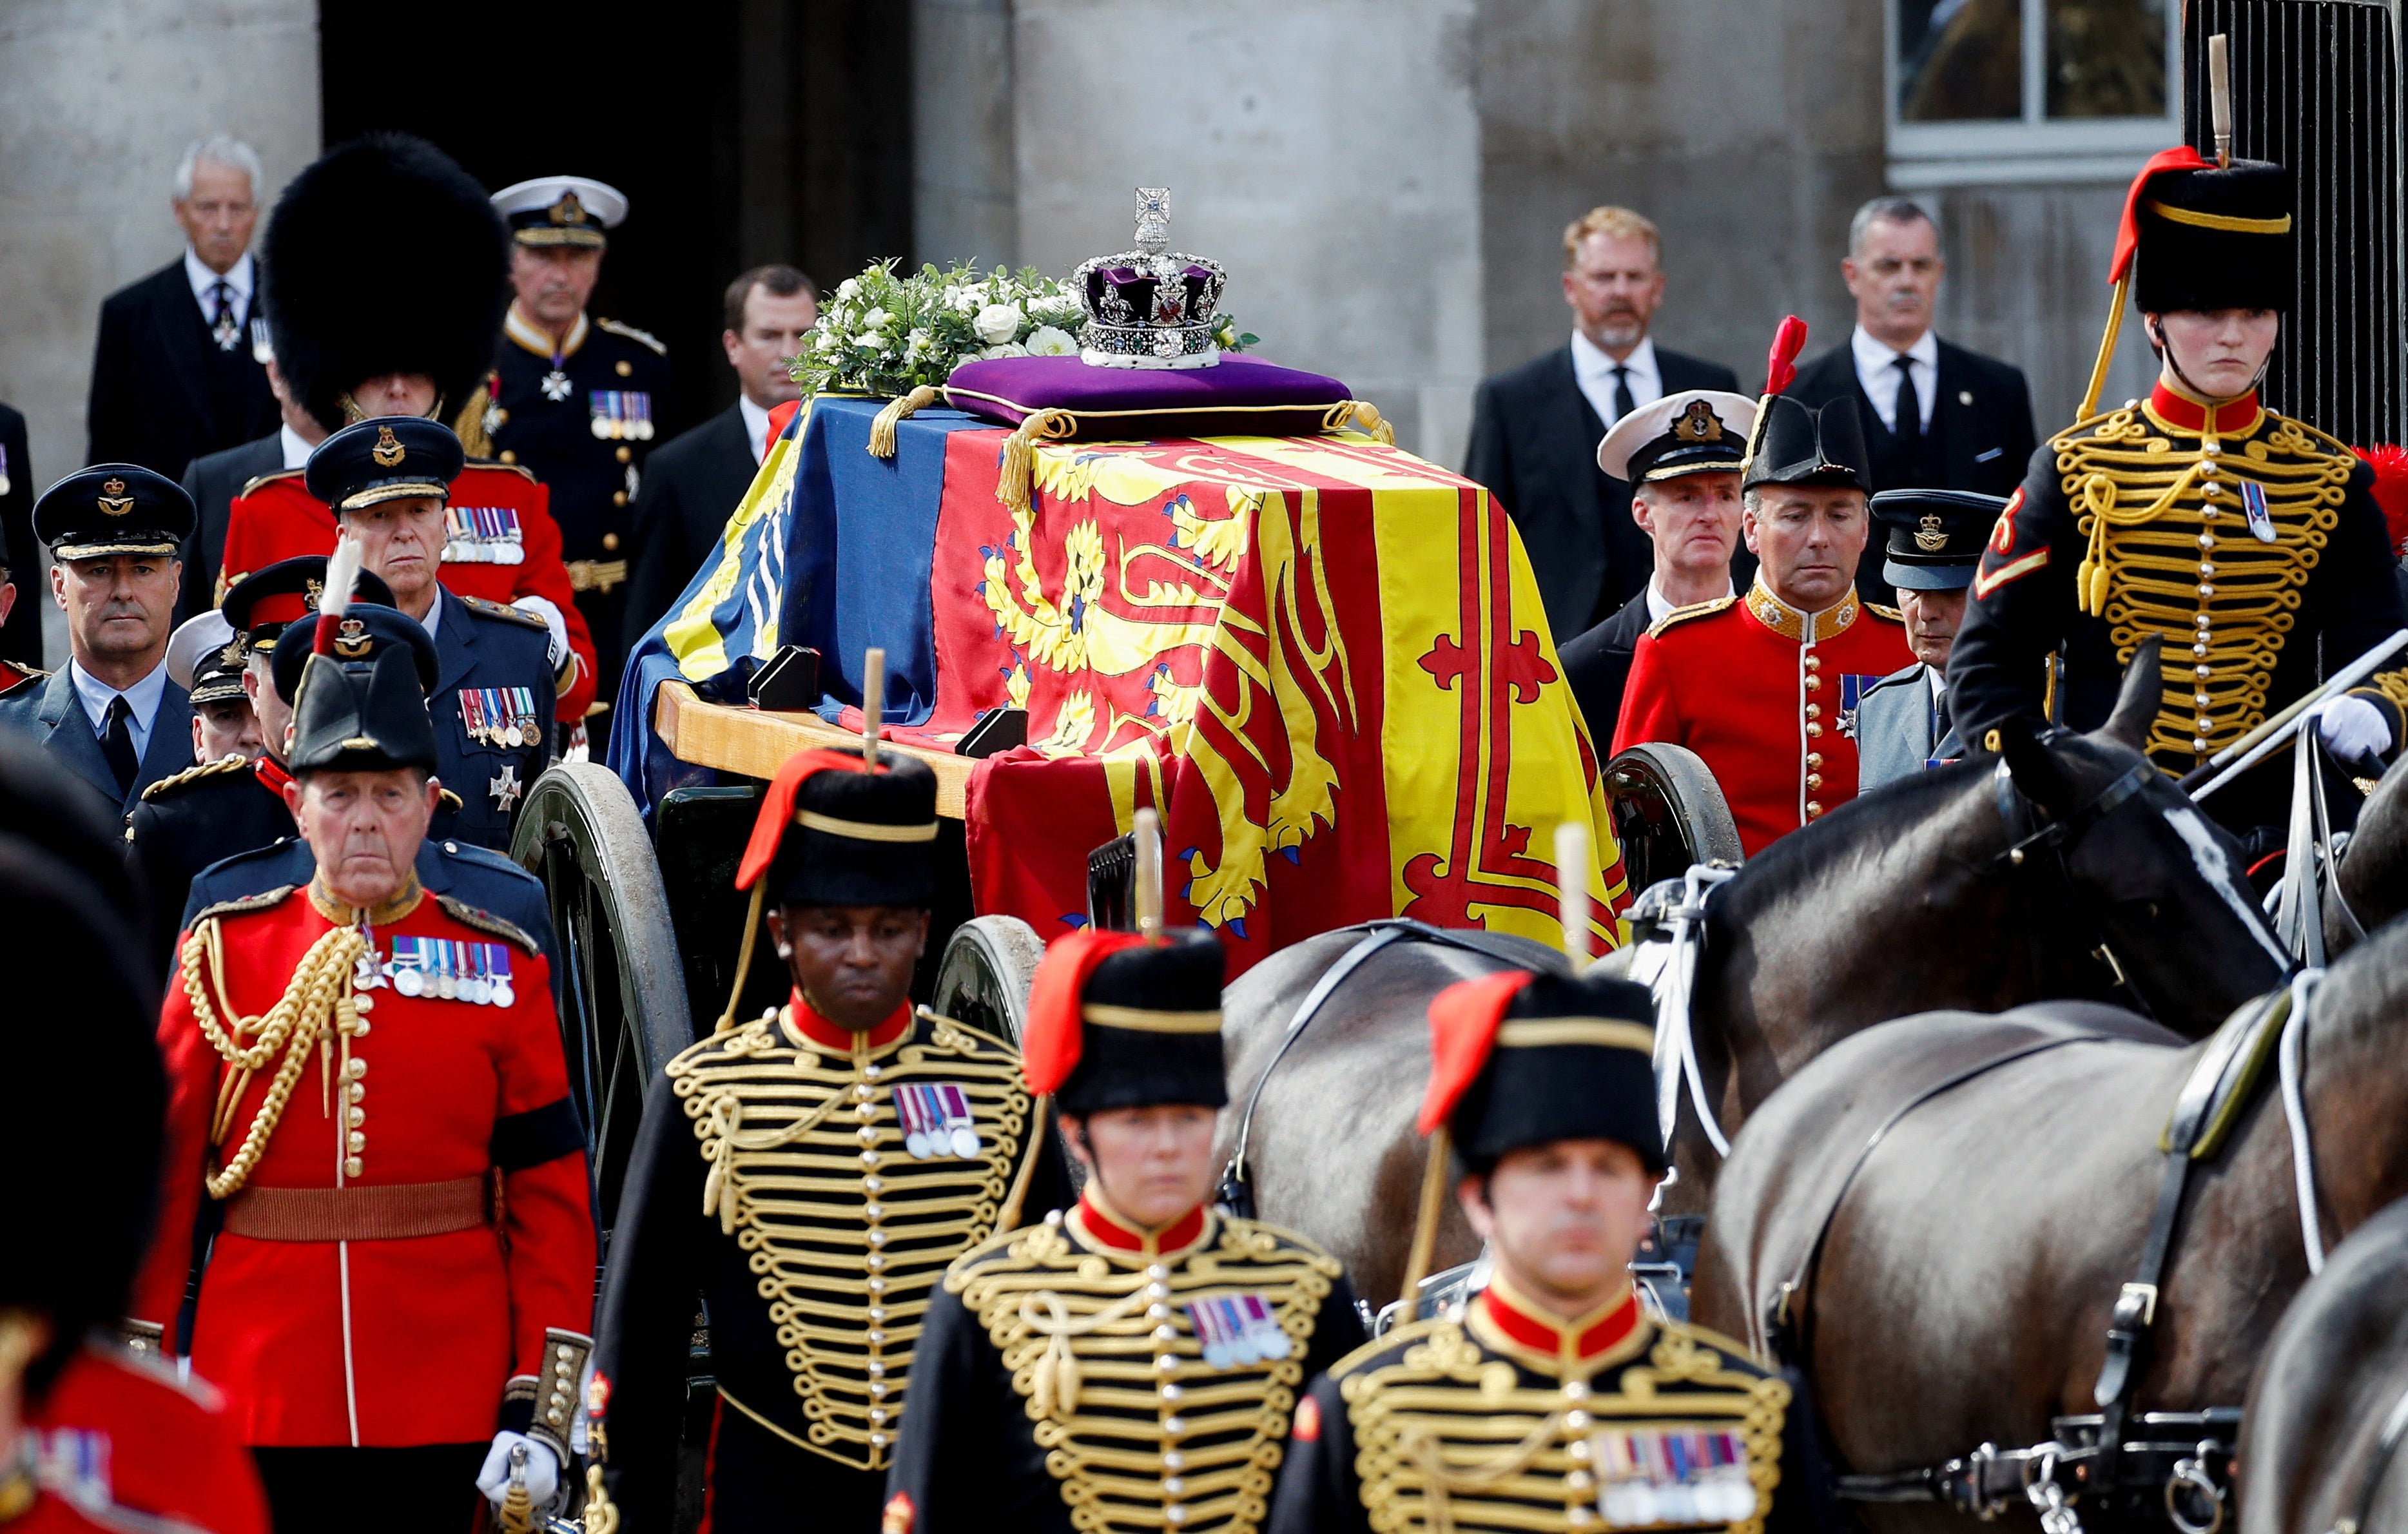 The Queen’s coffin carried on a horse-drawn gun carriage during the ceremonial procession from Buckingham Palace to Westminster Hall on Wednesday (Peter Nicholls/PA)